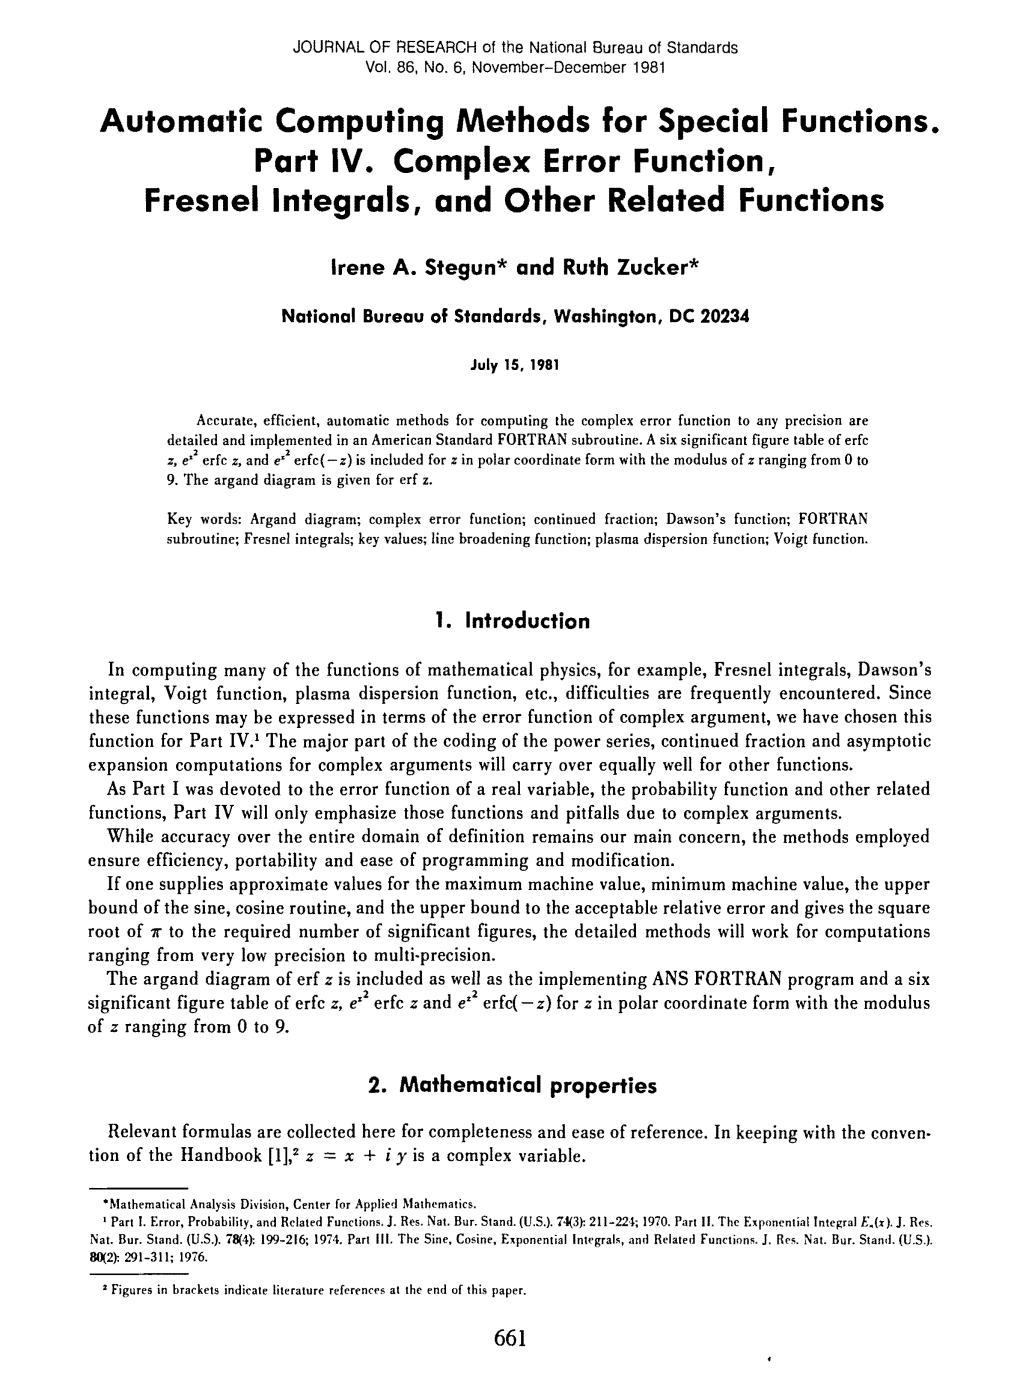 Automatic Computing Methods for Special Functions. Part IV. Complex Error Function, Fresnel Integrals, and Other Related Functions